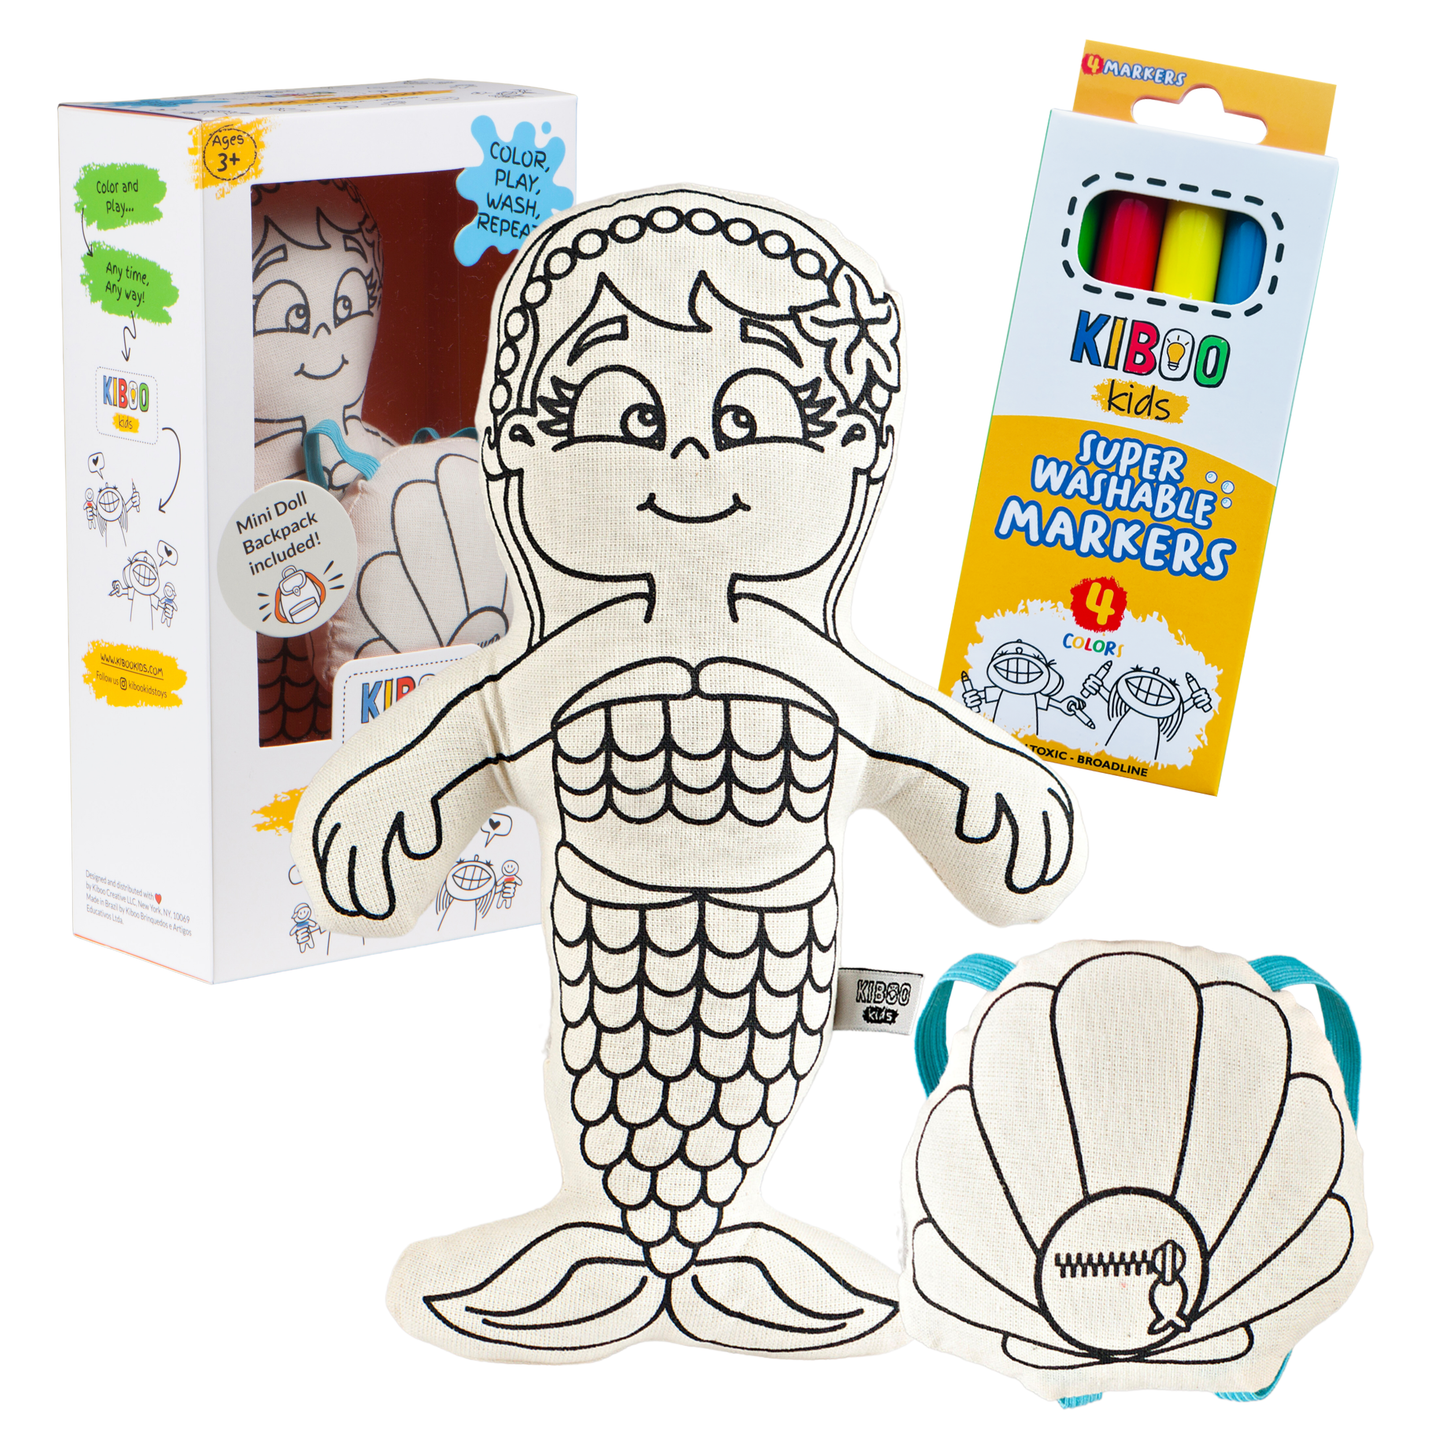 Kiboo Kids: Mermaid with Mini Shell Backpack - Colorable and Washable Doll for Creative Play